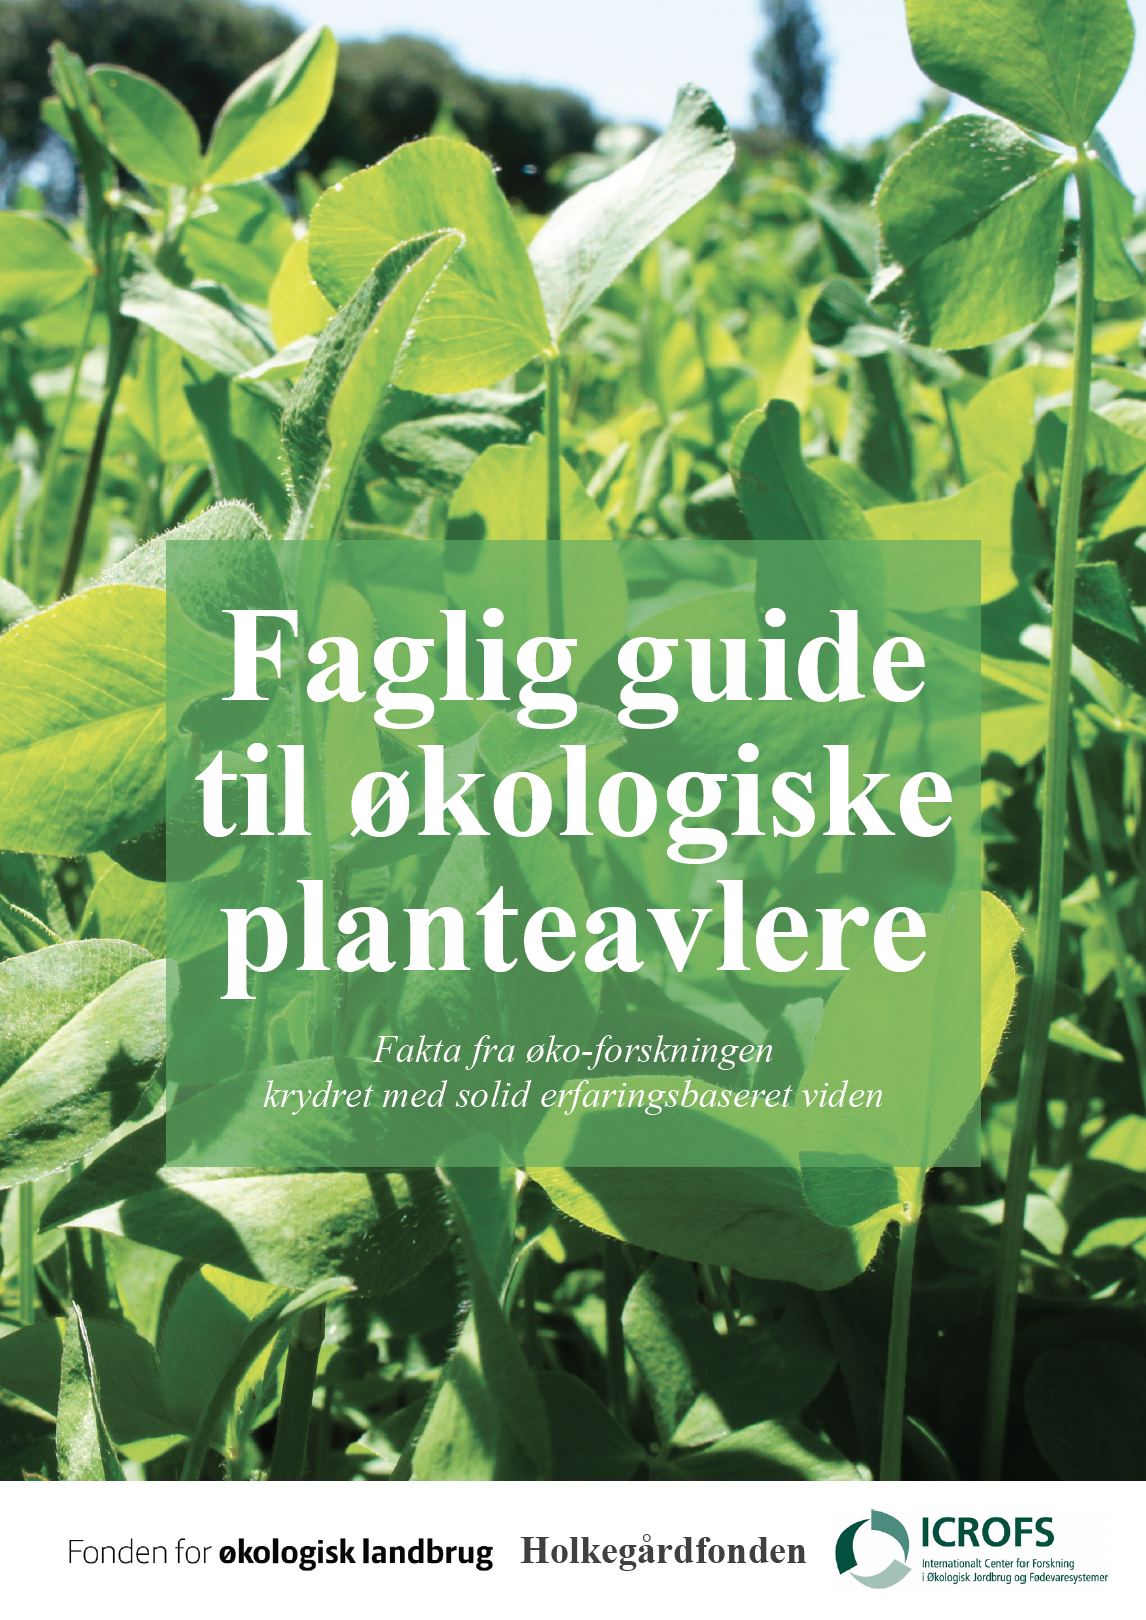 Professional guide for organic arable farmers